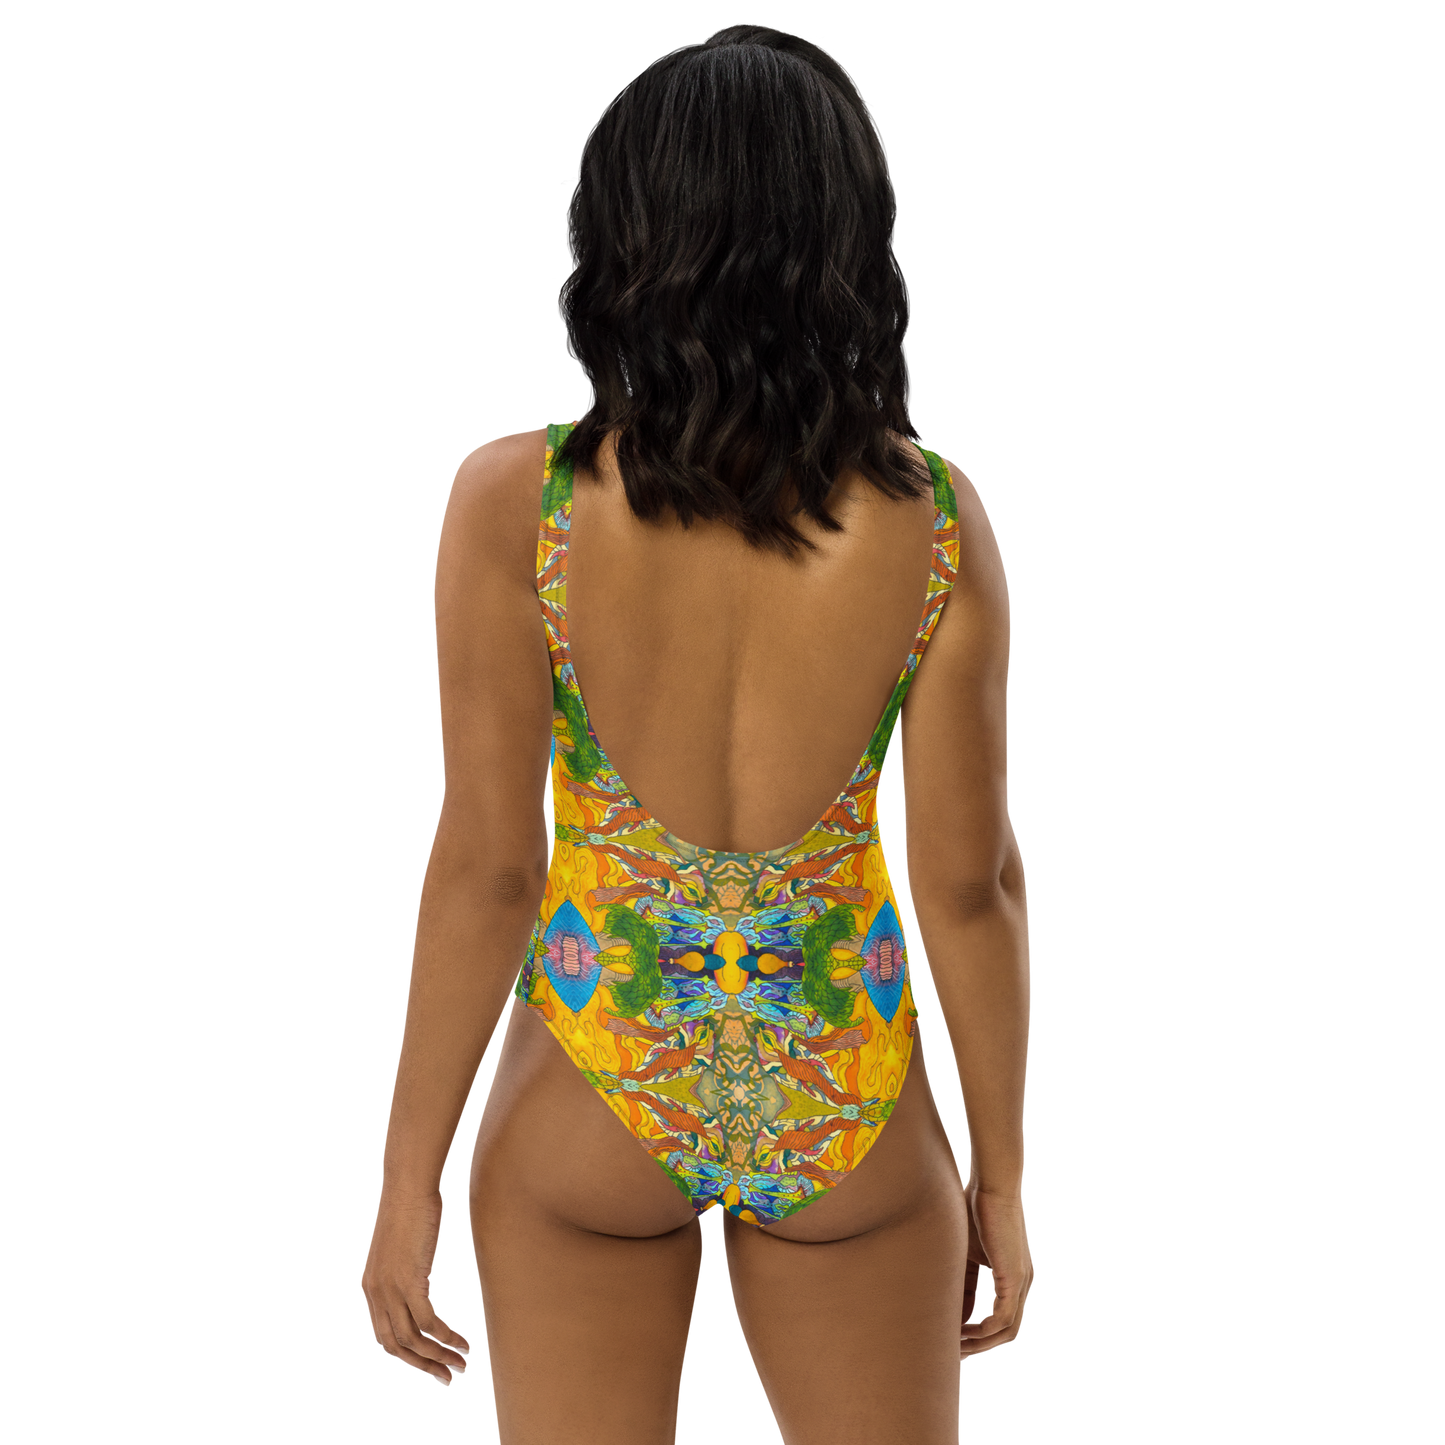 Fruits of Passion Swimsuit